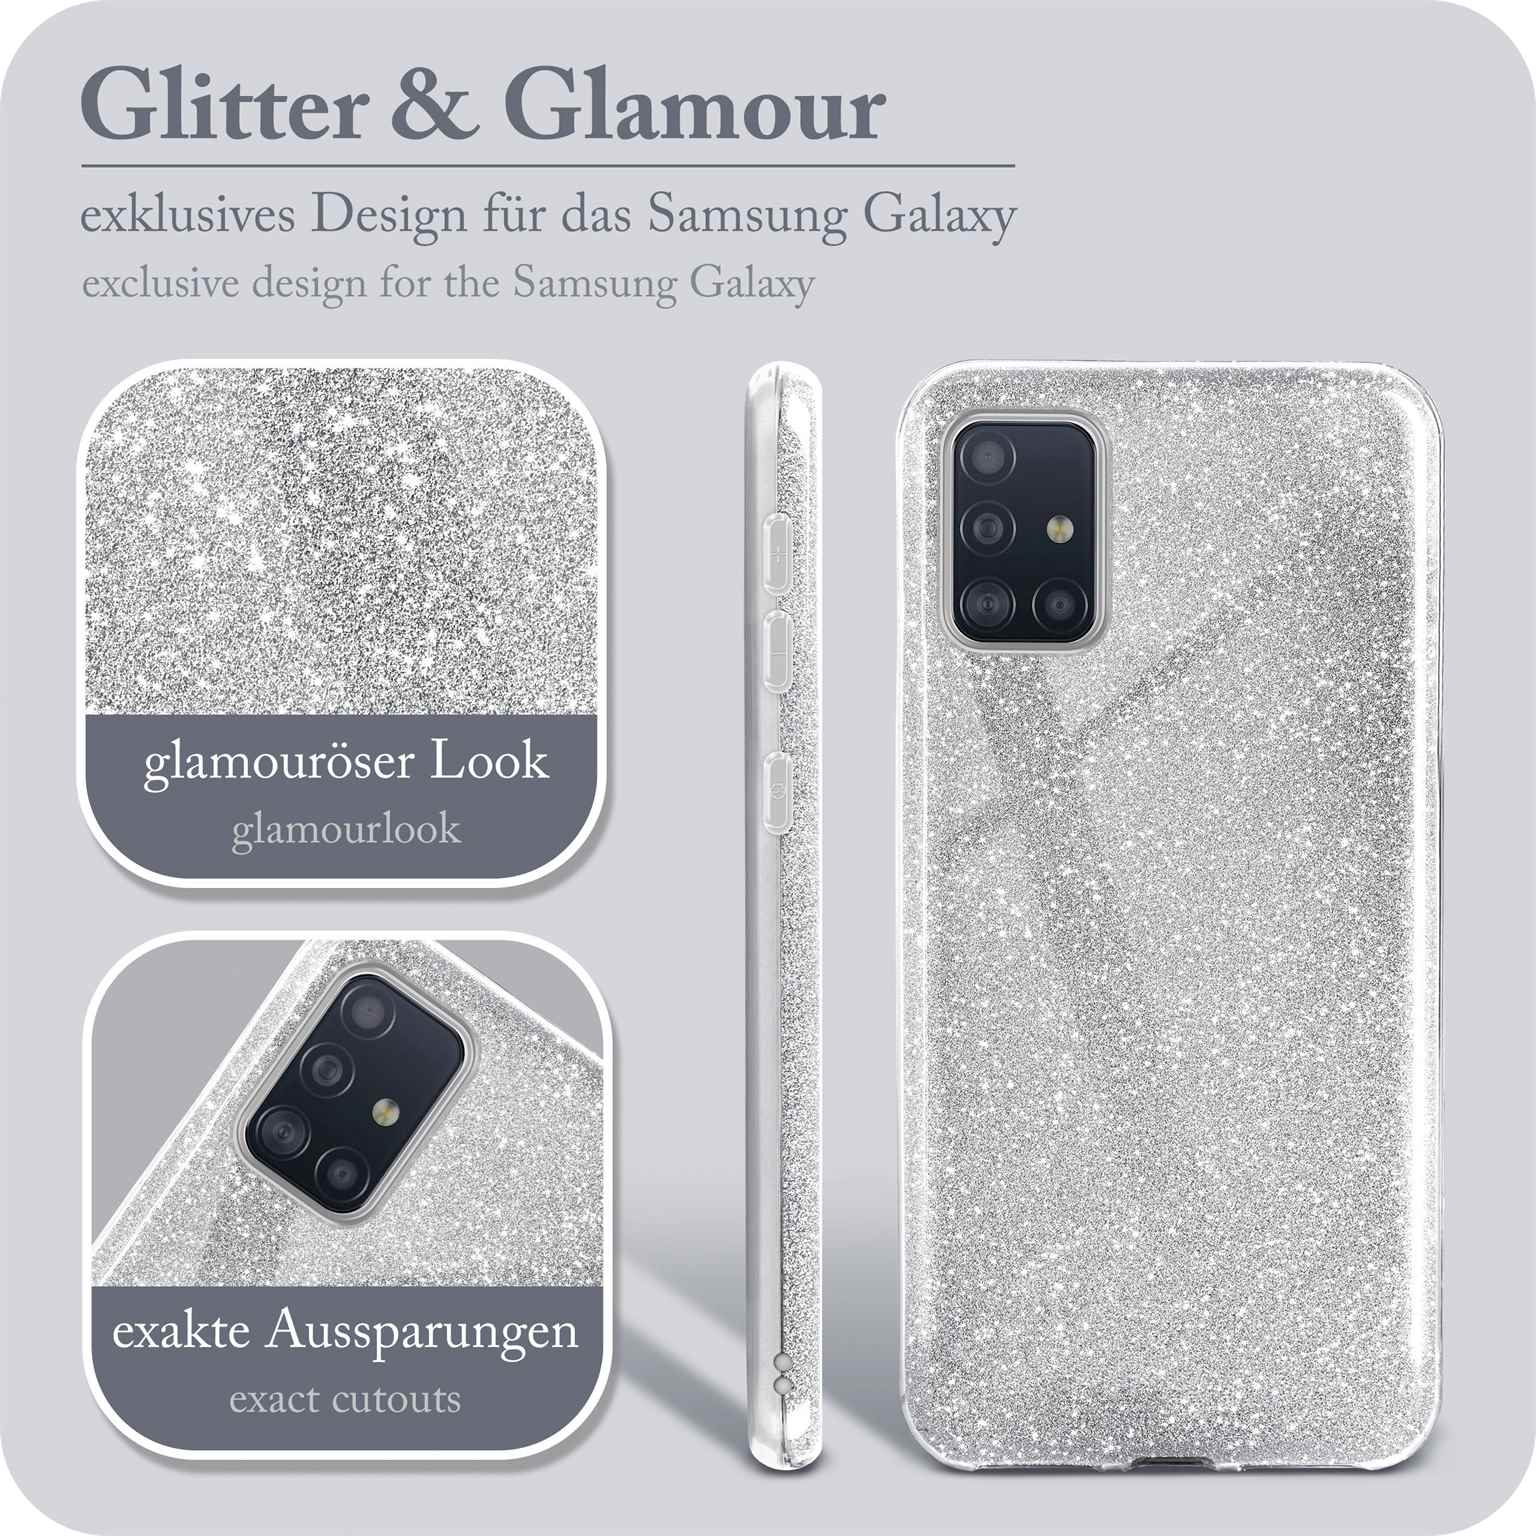 Samsung, ONEFLOW A71, Sparkle Glitter Backcover, Silver Galaxy - Case,